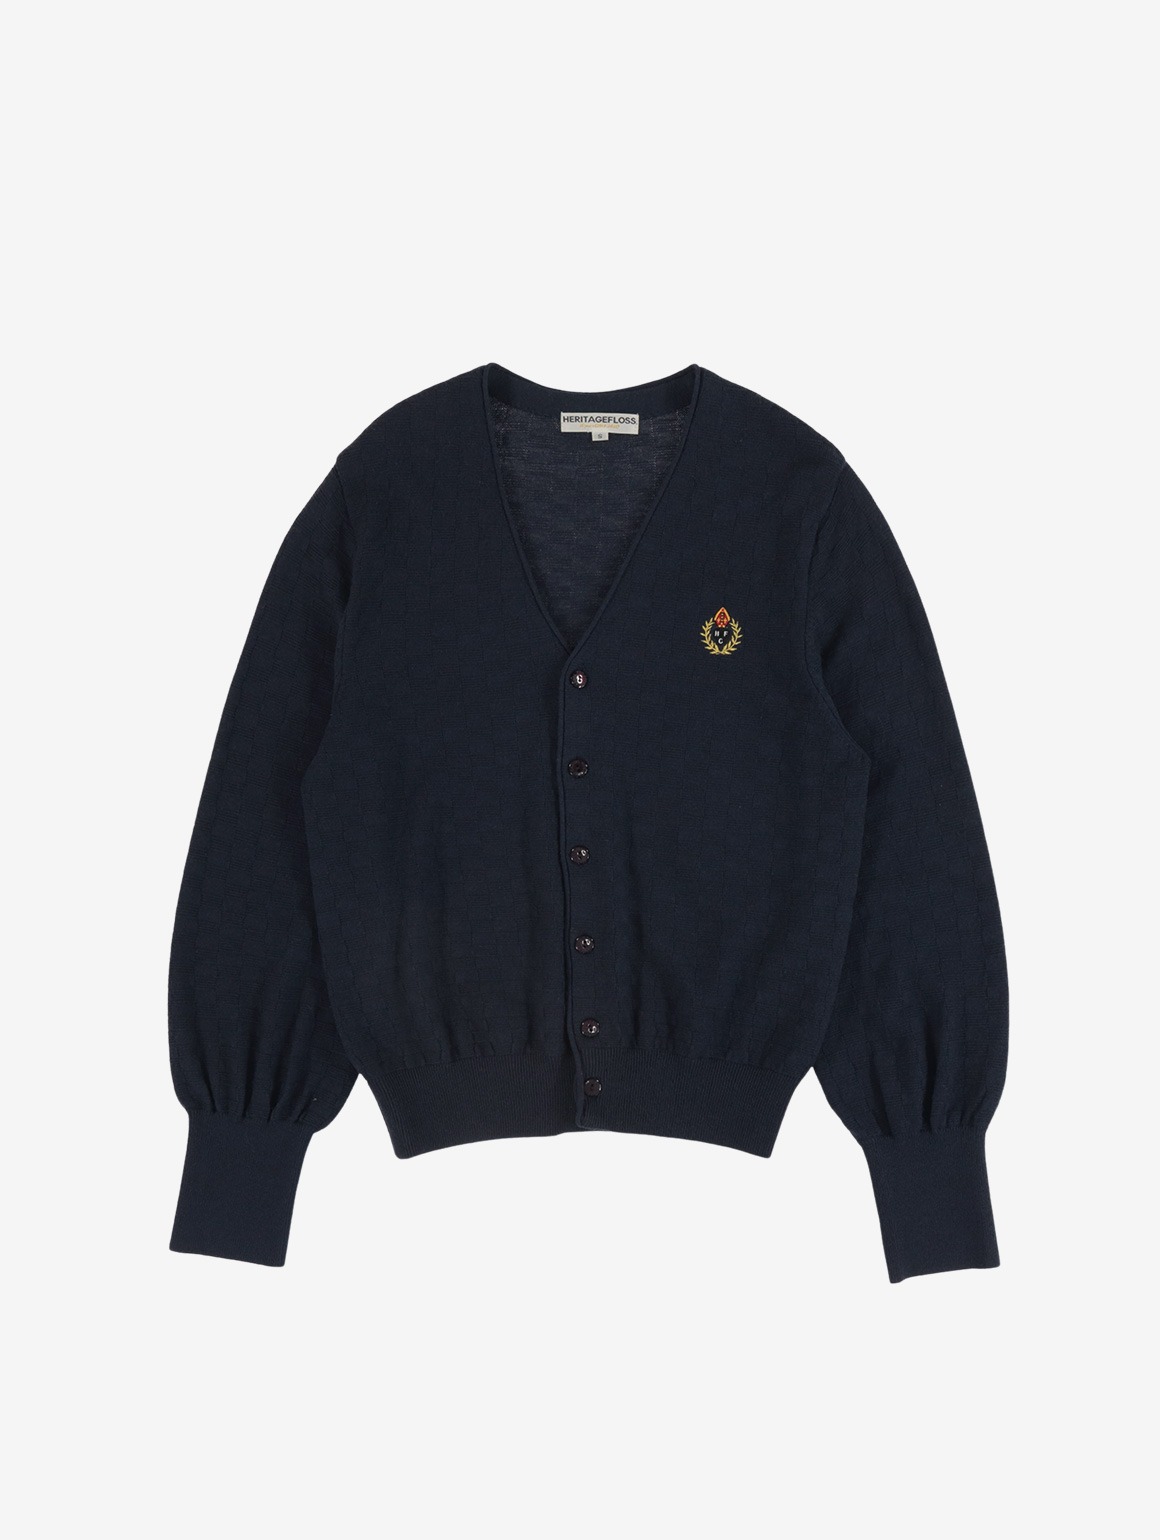 HFC CREST CHECKED CARDIGAN